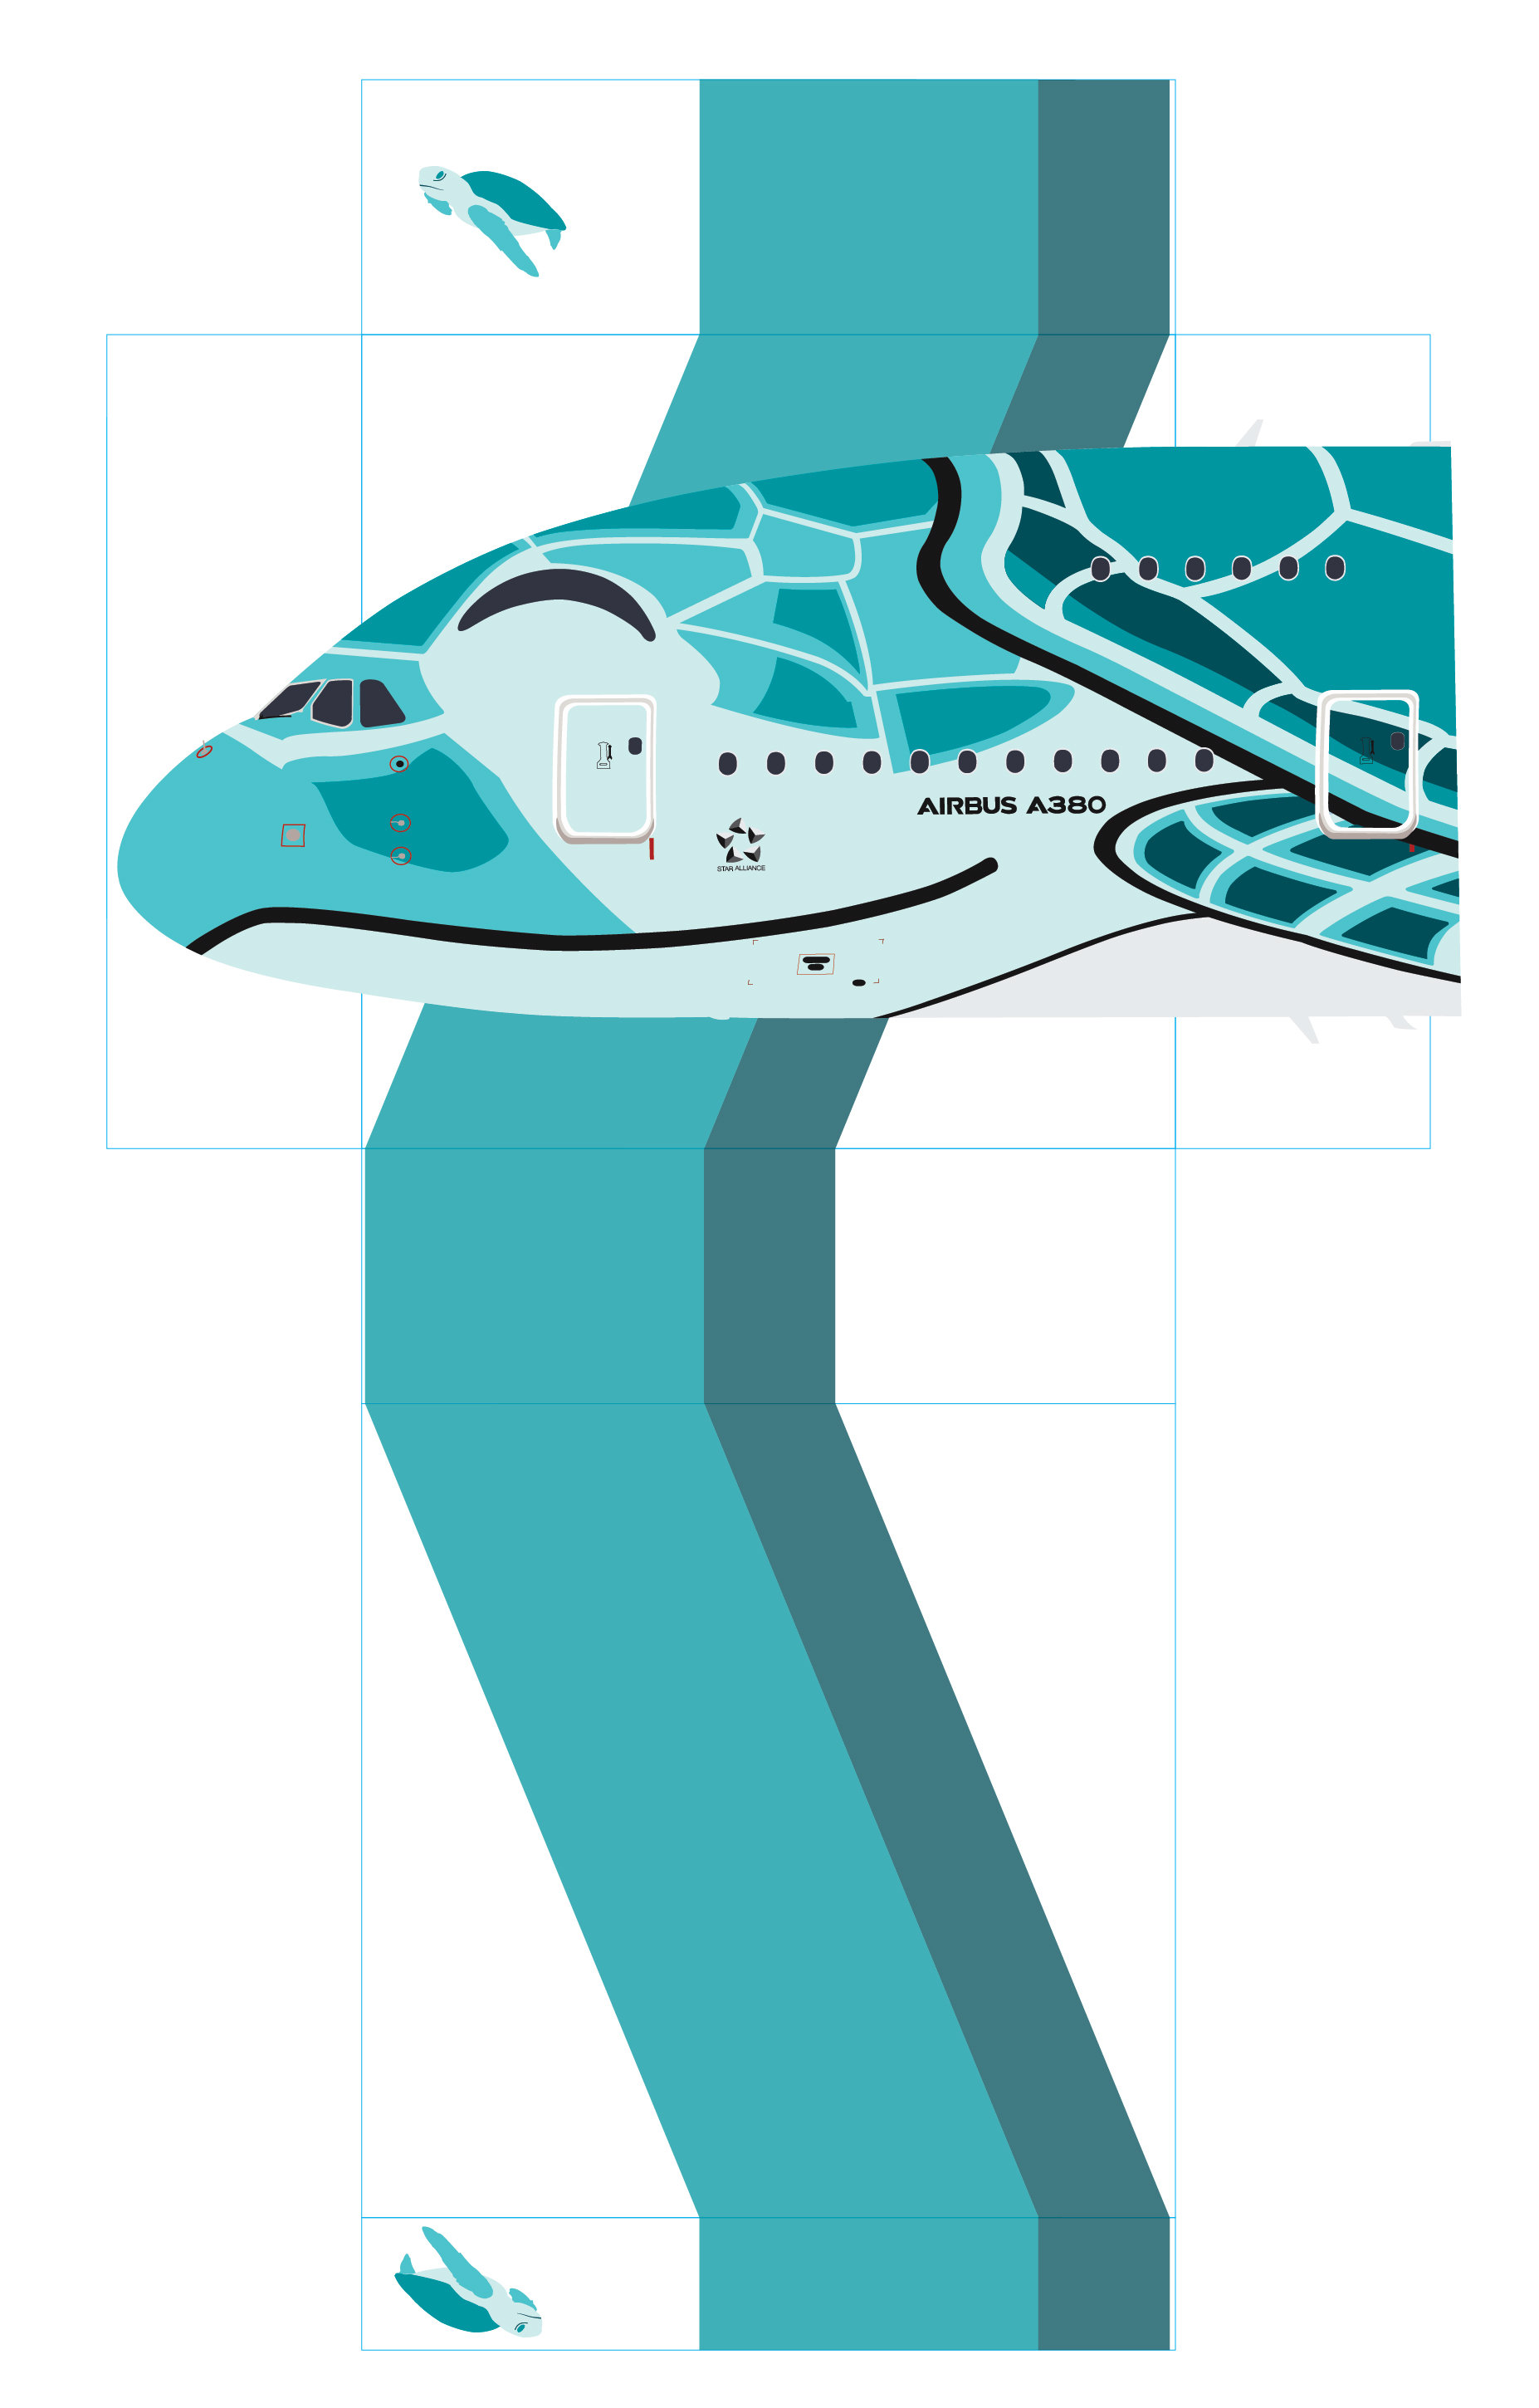 Airbus_A380 box design [Recovered]-02.jpg